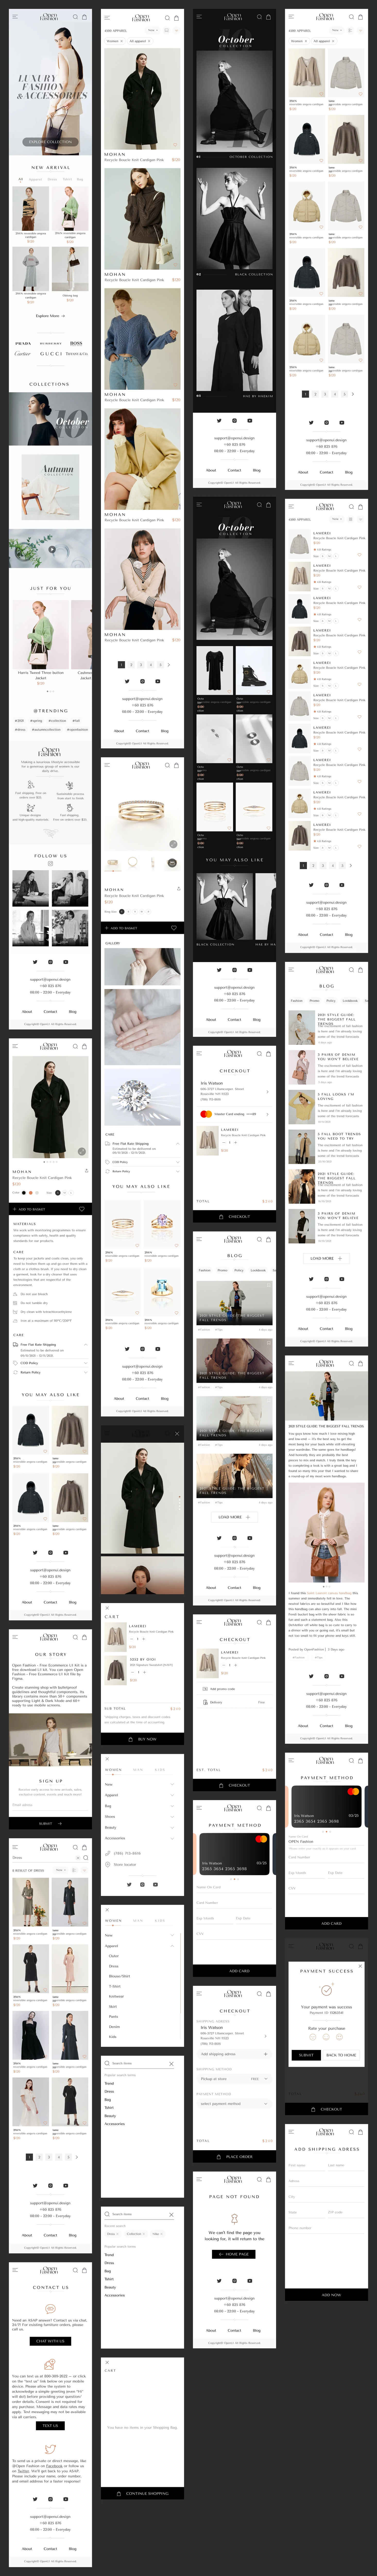 Open Fashion - Free eCommerce UI Kit for Figma - Free UI Kit with elegant and modern style will help you to quickly create your own design. Come with 30 essential screens, Open Fashion free UI kit are perfect fit for designer, developer, startup to quick adapt design. Open Fashion support auto layout, variant components and free font.